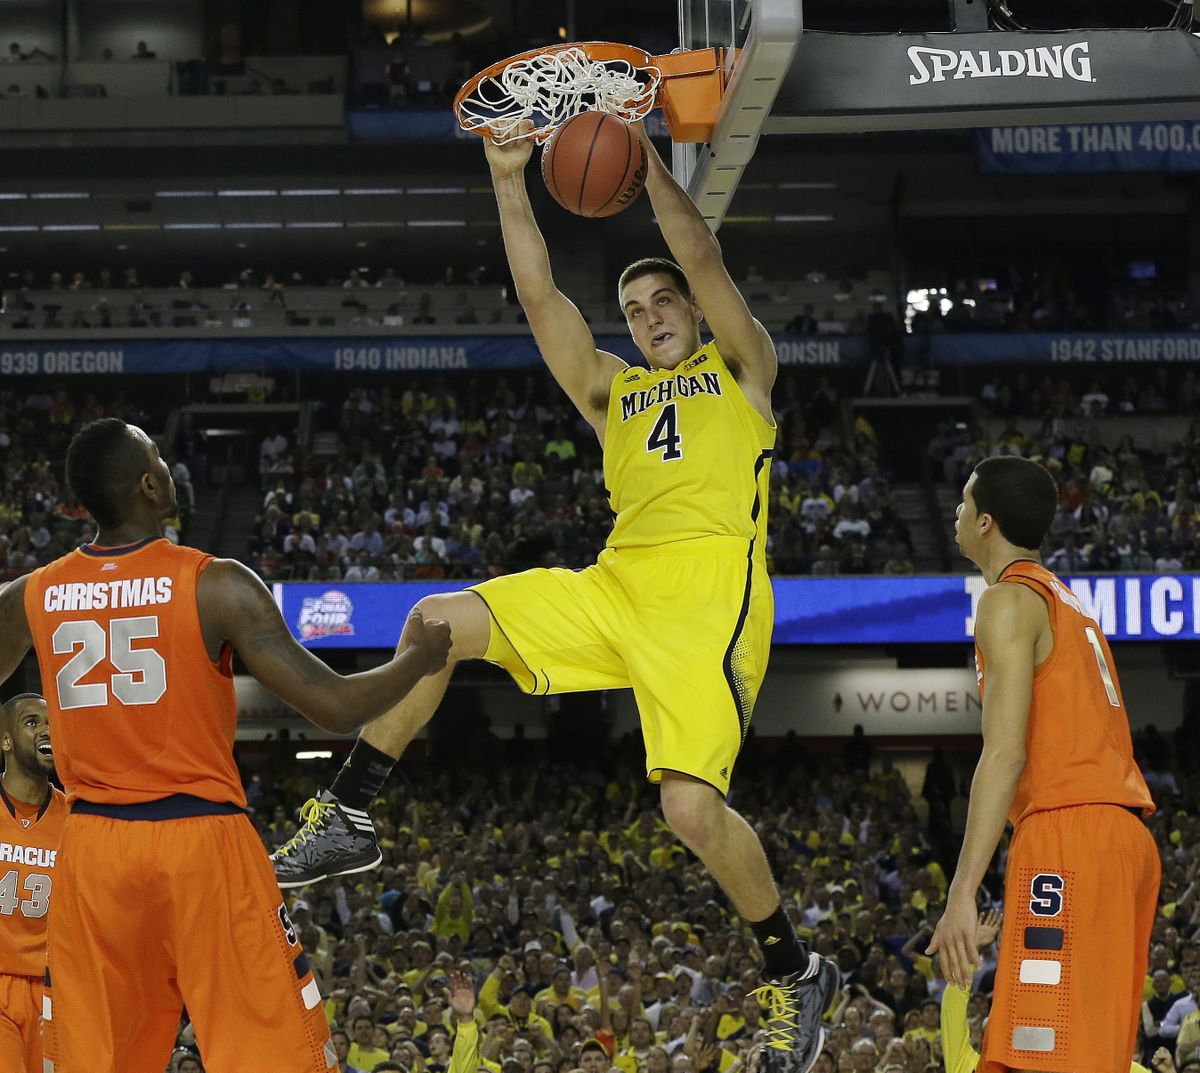 Mitch McGary, one of Michigan’s freshman stars, dunks the ball against Syracuse during the second half of the Wolverines’ 61-56 victory. (Associated Press)